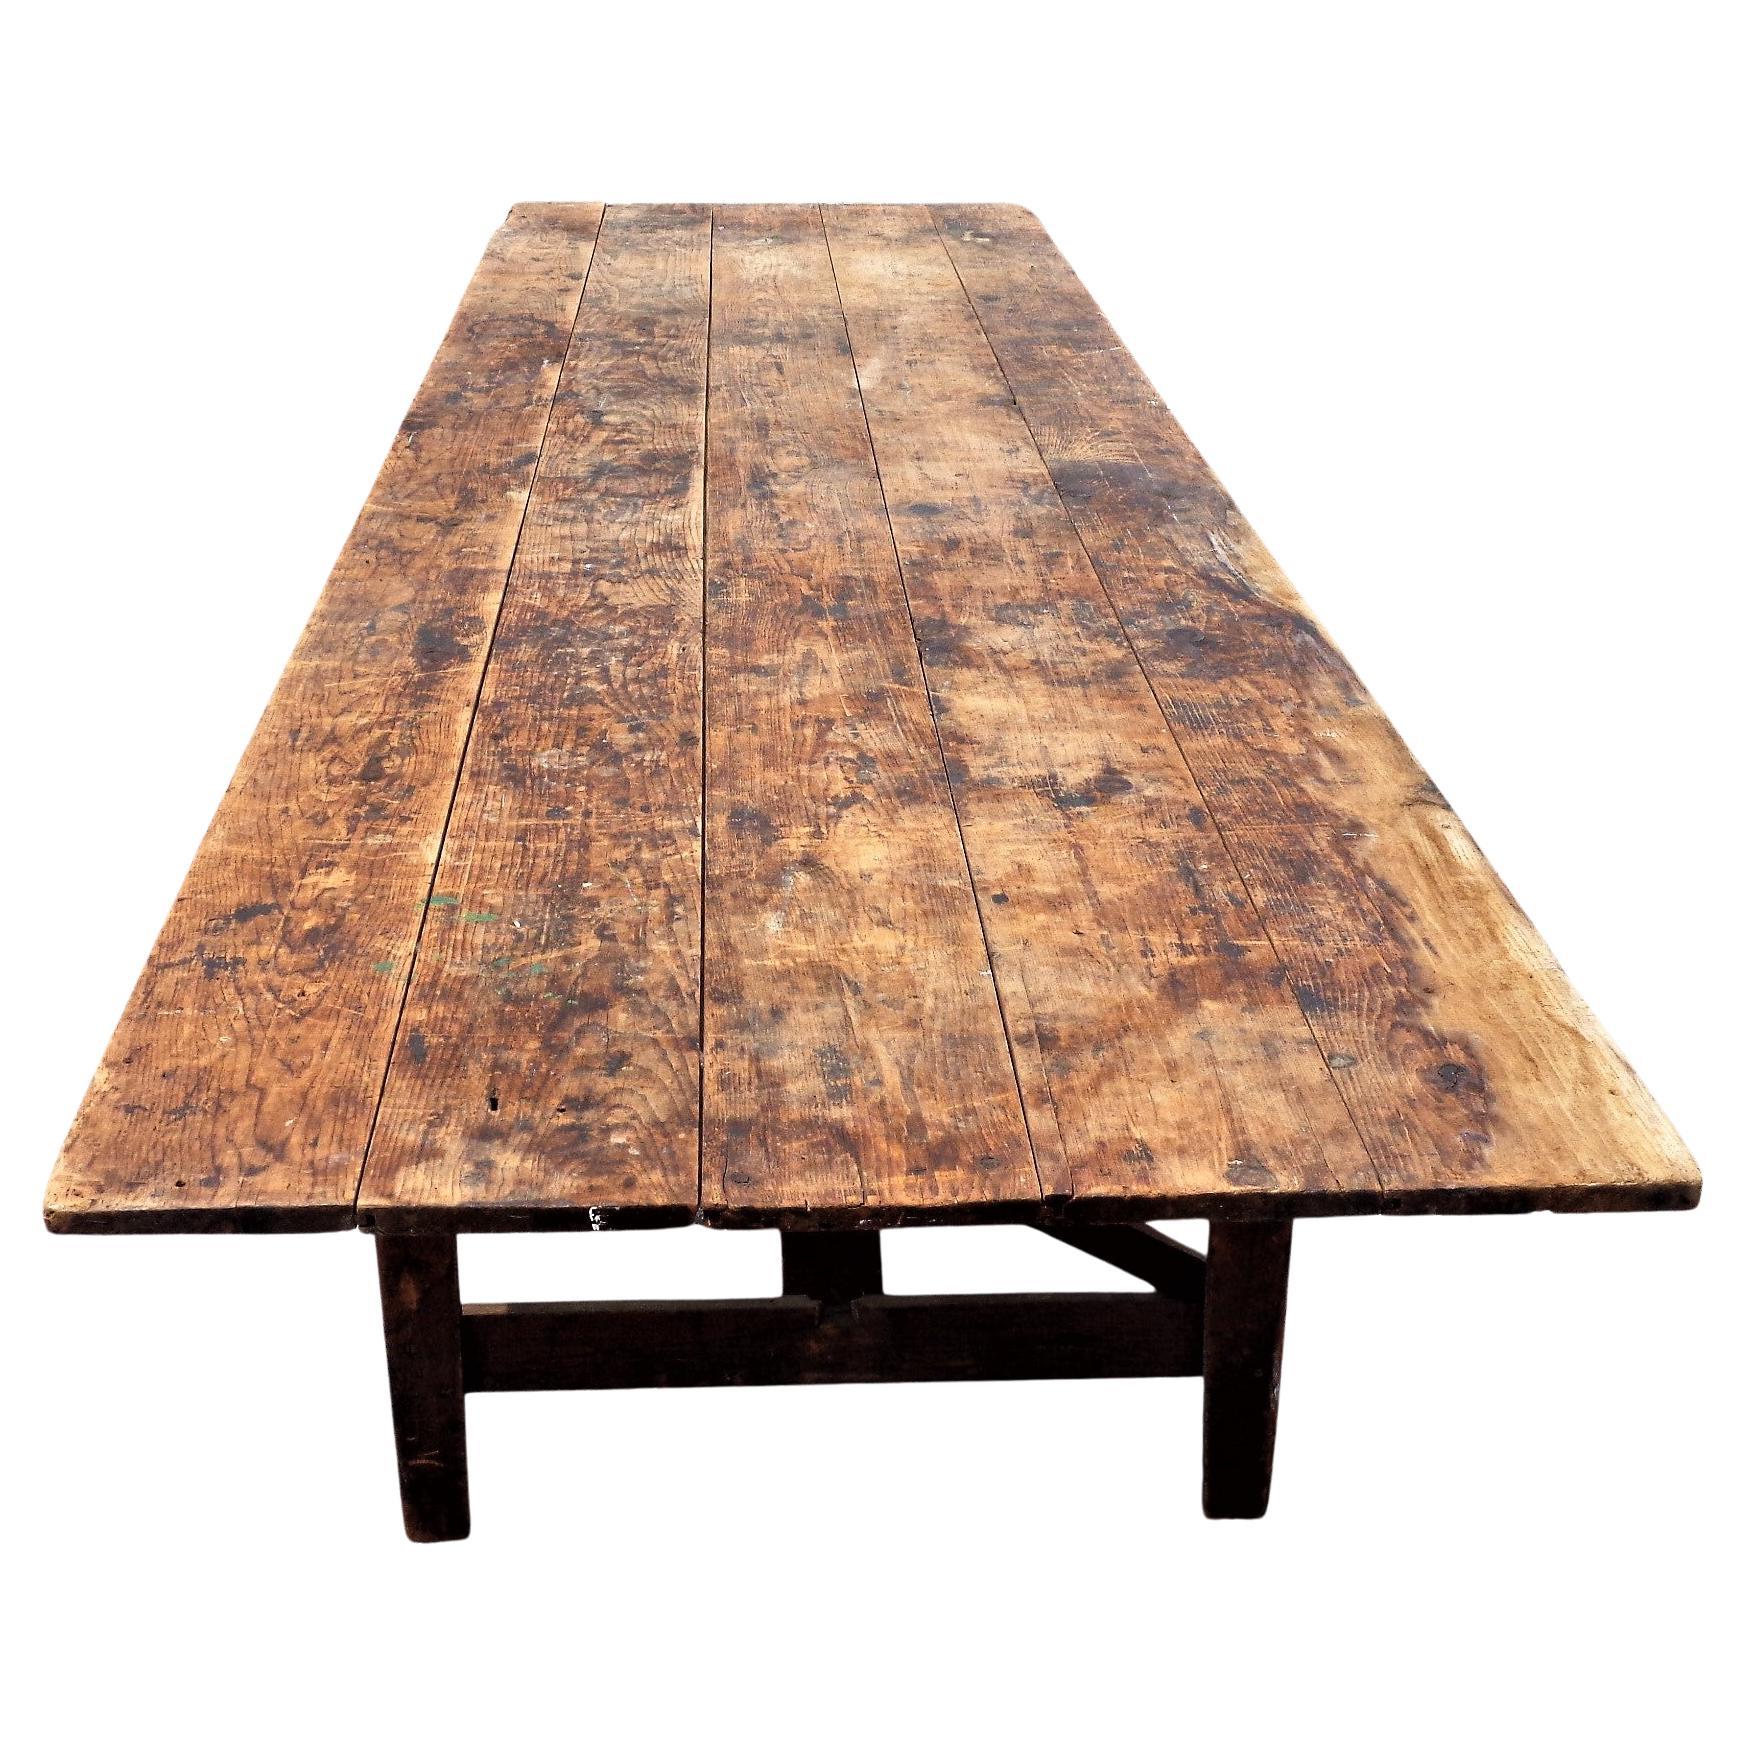 Antique American Eleven Foot Long Folding Farm Table In Good Condition For Sale In Rochester, NY